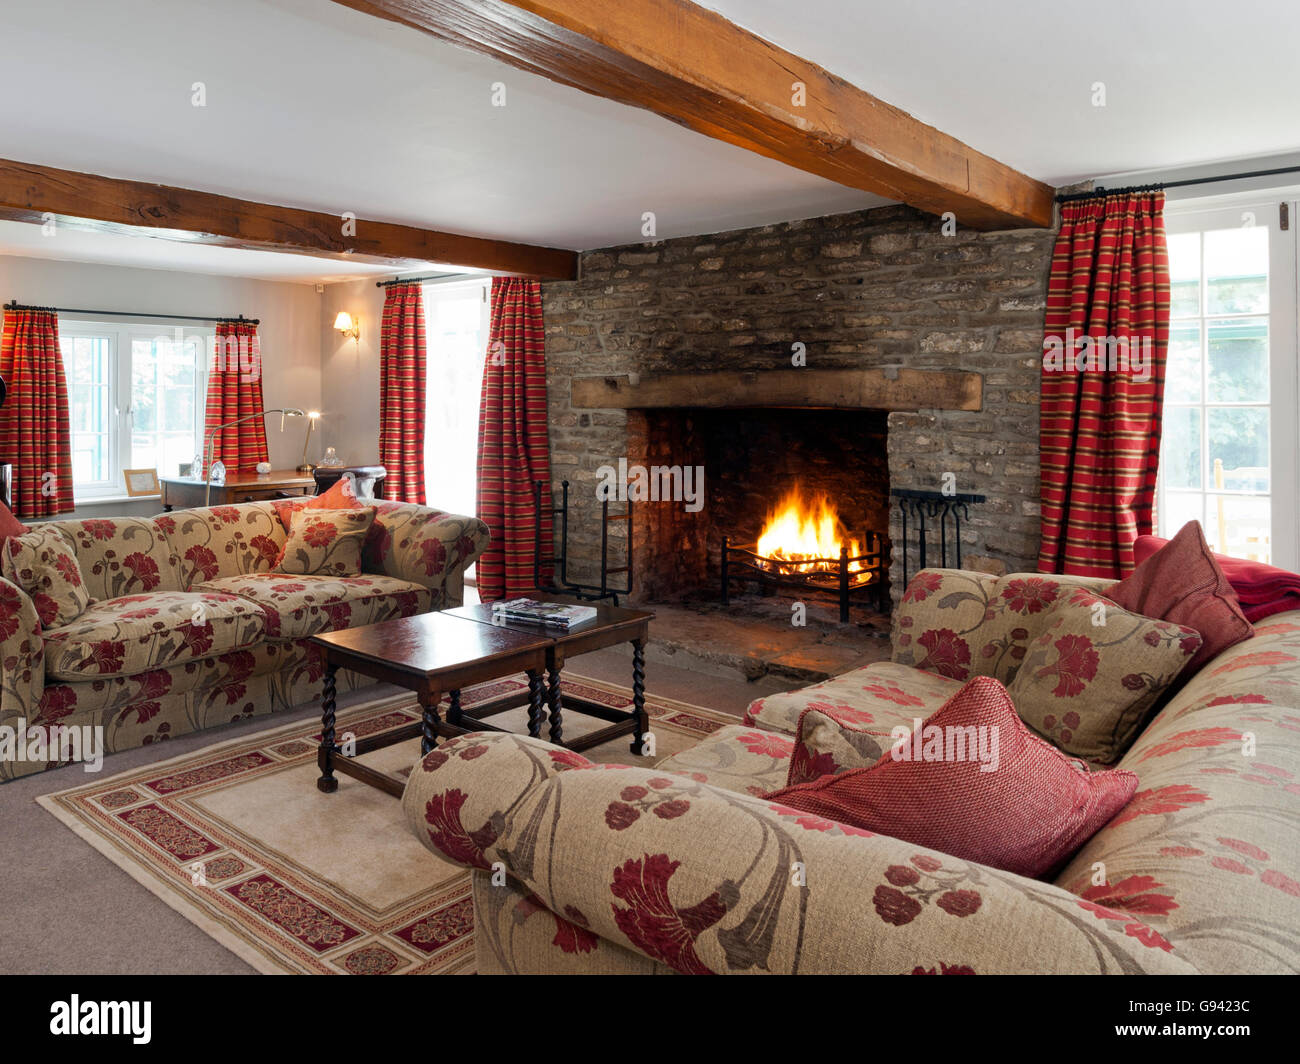 Very traditional sitting room with a roaring open fire Stock Photo